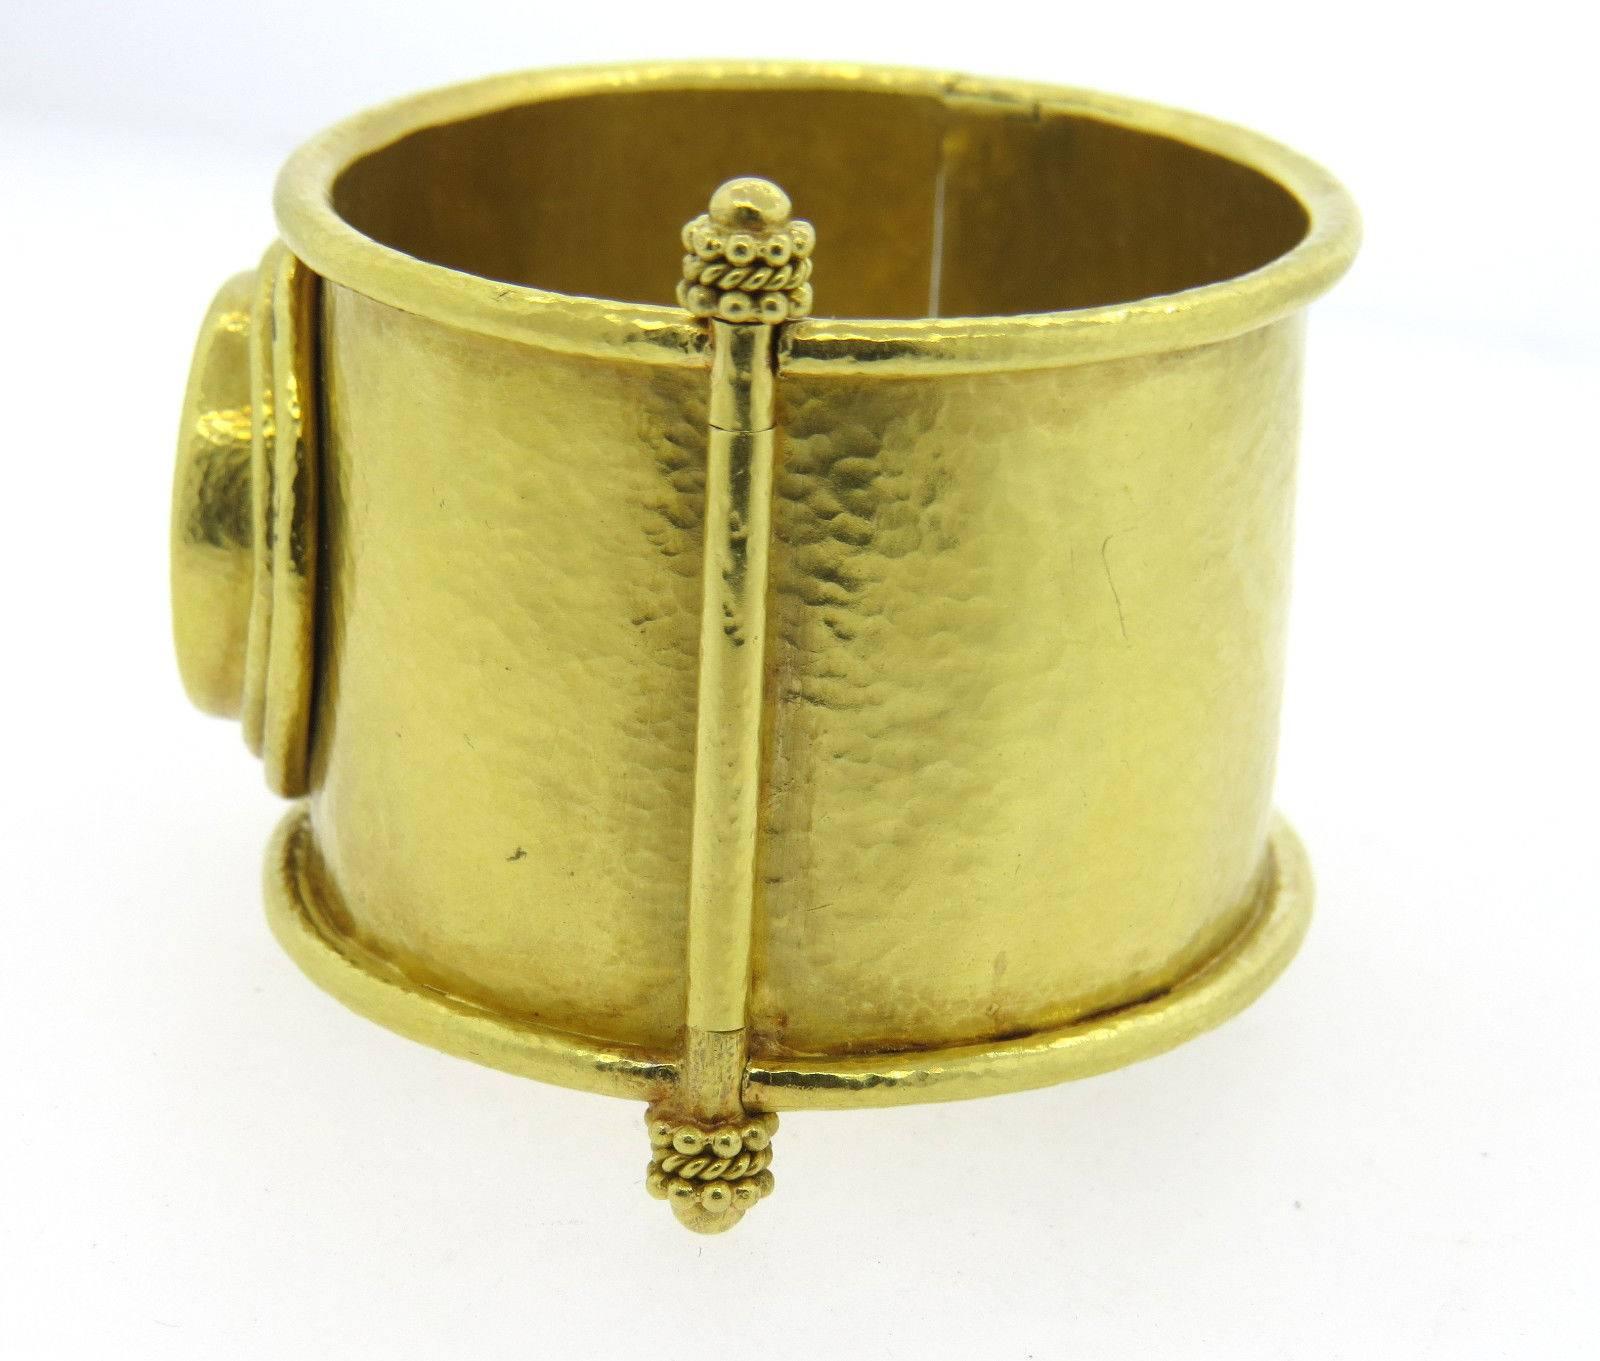 An  18k yellow gold bracelet set with an ancient coin.  Crafted by Elizabeth Locke, the bracelet will fit up to 6 1/2